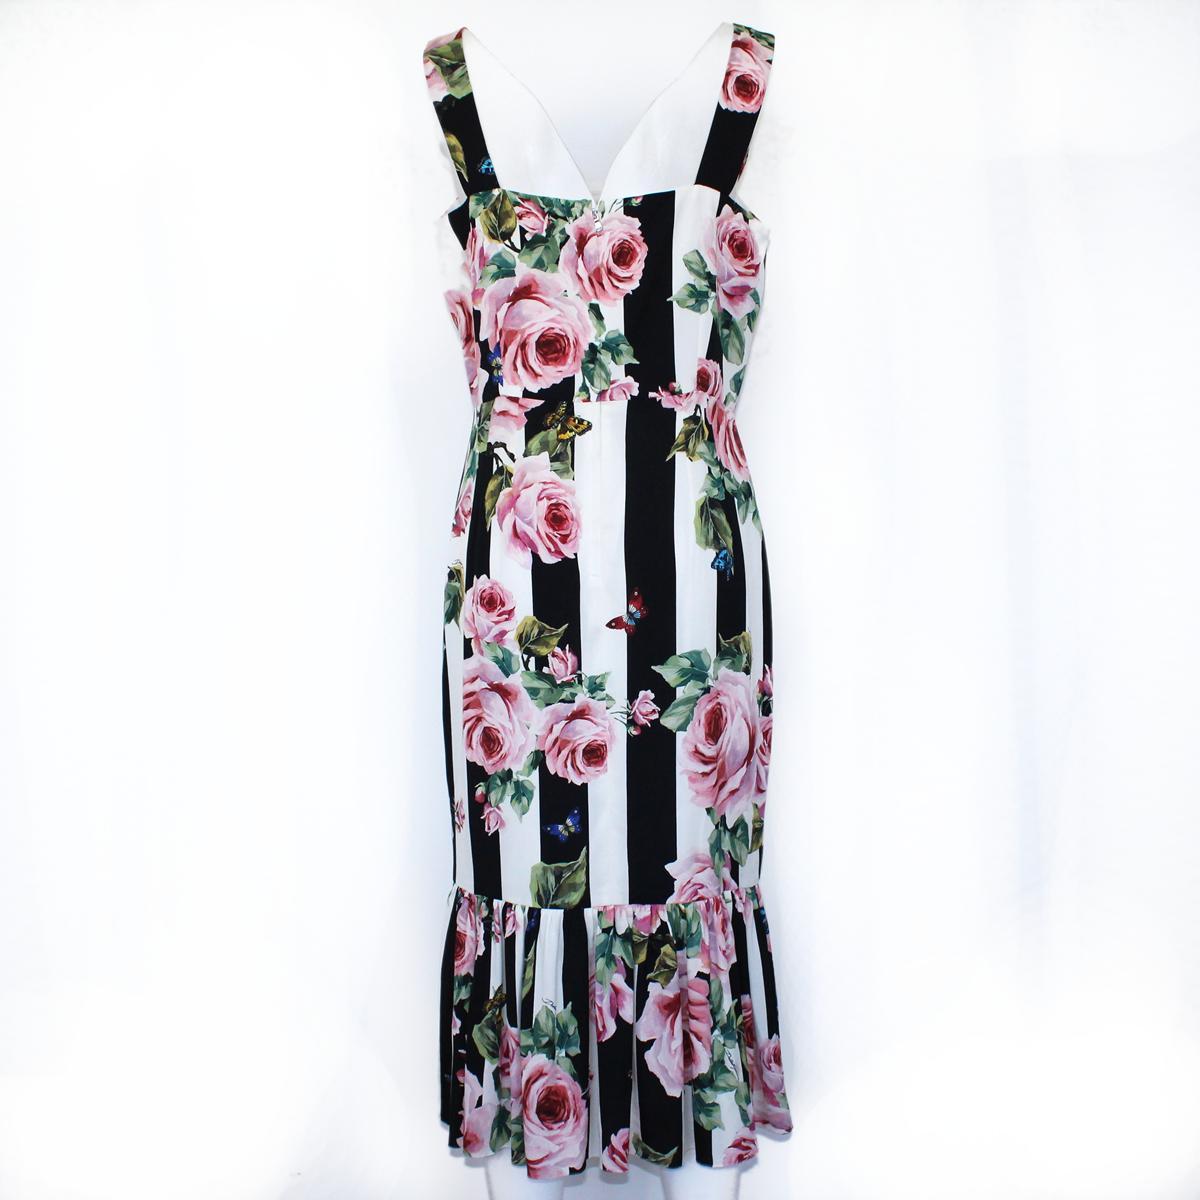 Iconic & chic dress by Dolce & Gabbana
Silk
Epalouettes
Roses print
Black stripes on white base
Total lenght (shoulder/hem) cm 117 (46 inches)
Original price € 1450
Worldwide express shipping included in the price !